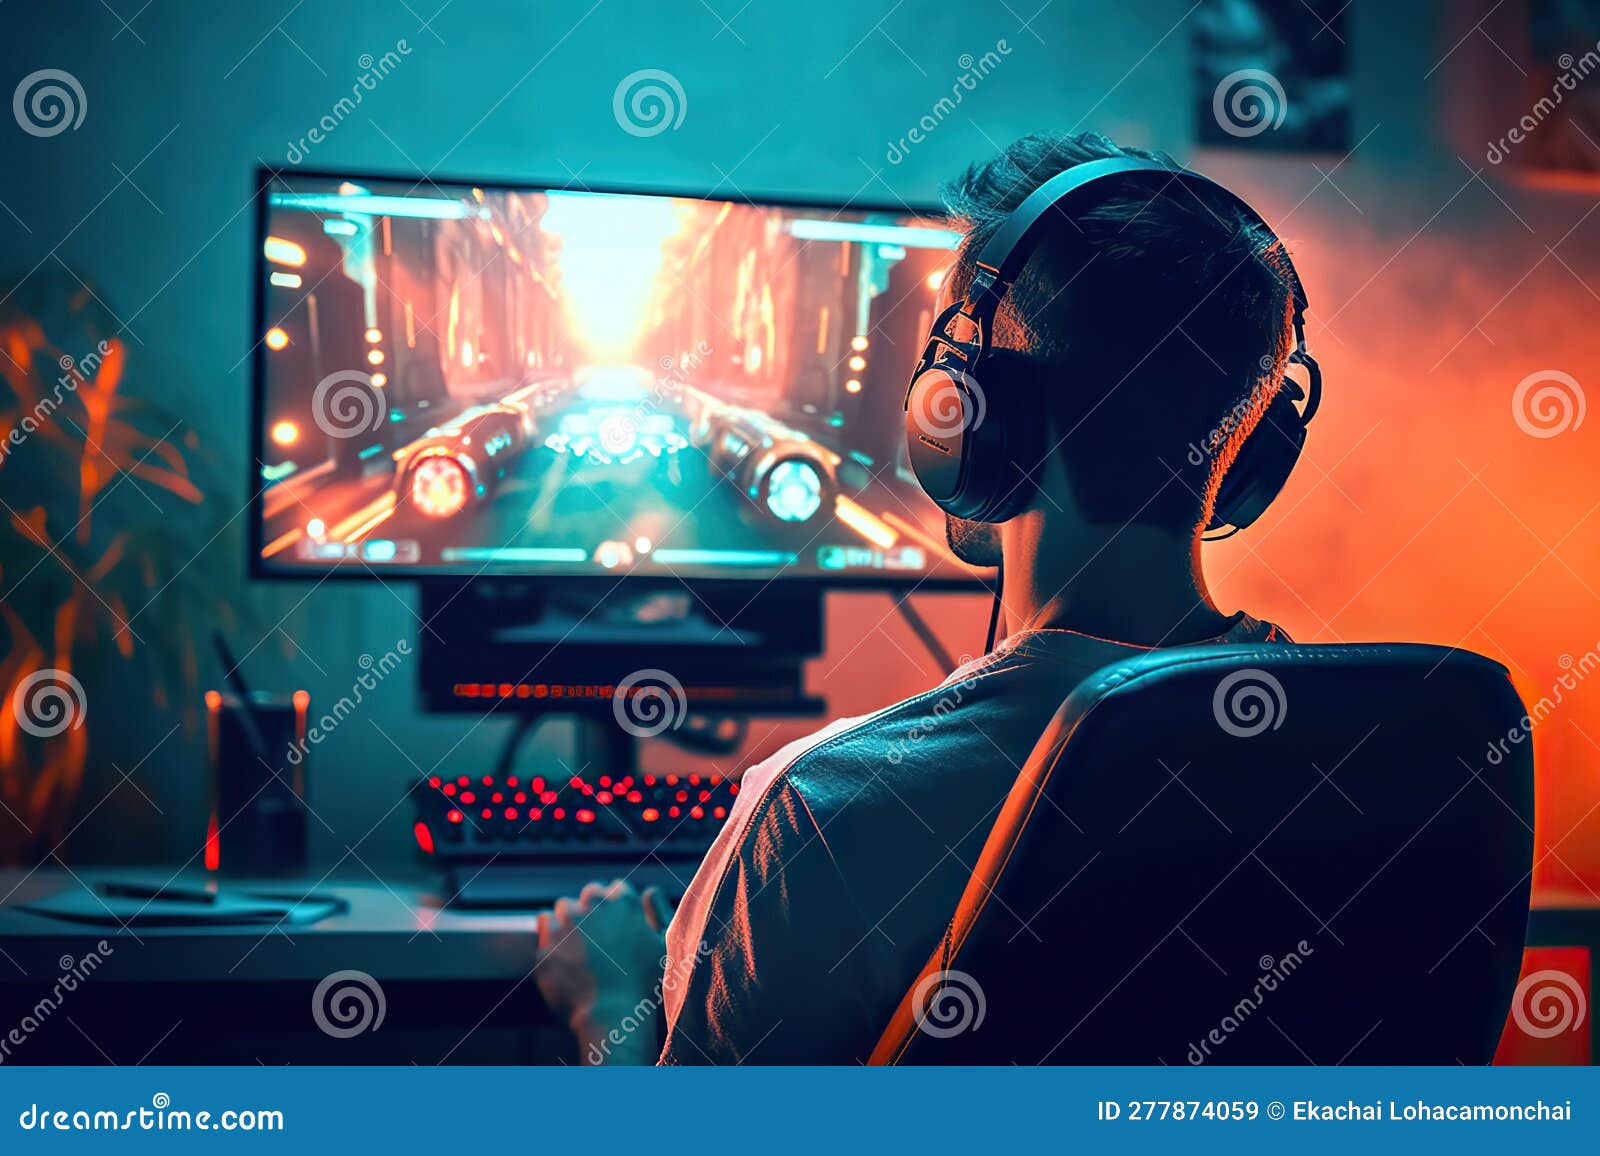 Online Gaming Enthusiast Wearing Headphones and Focused on Screen Monitor for Esports Competition